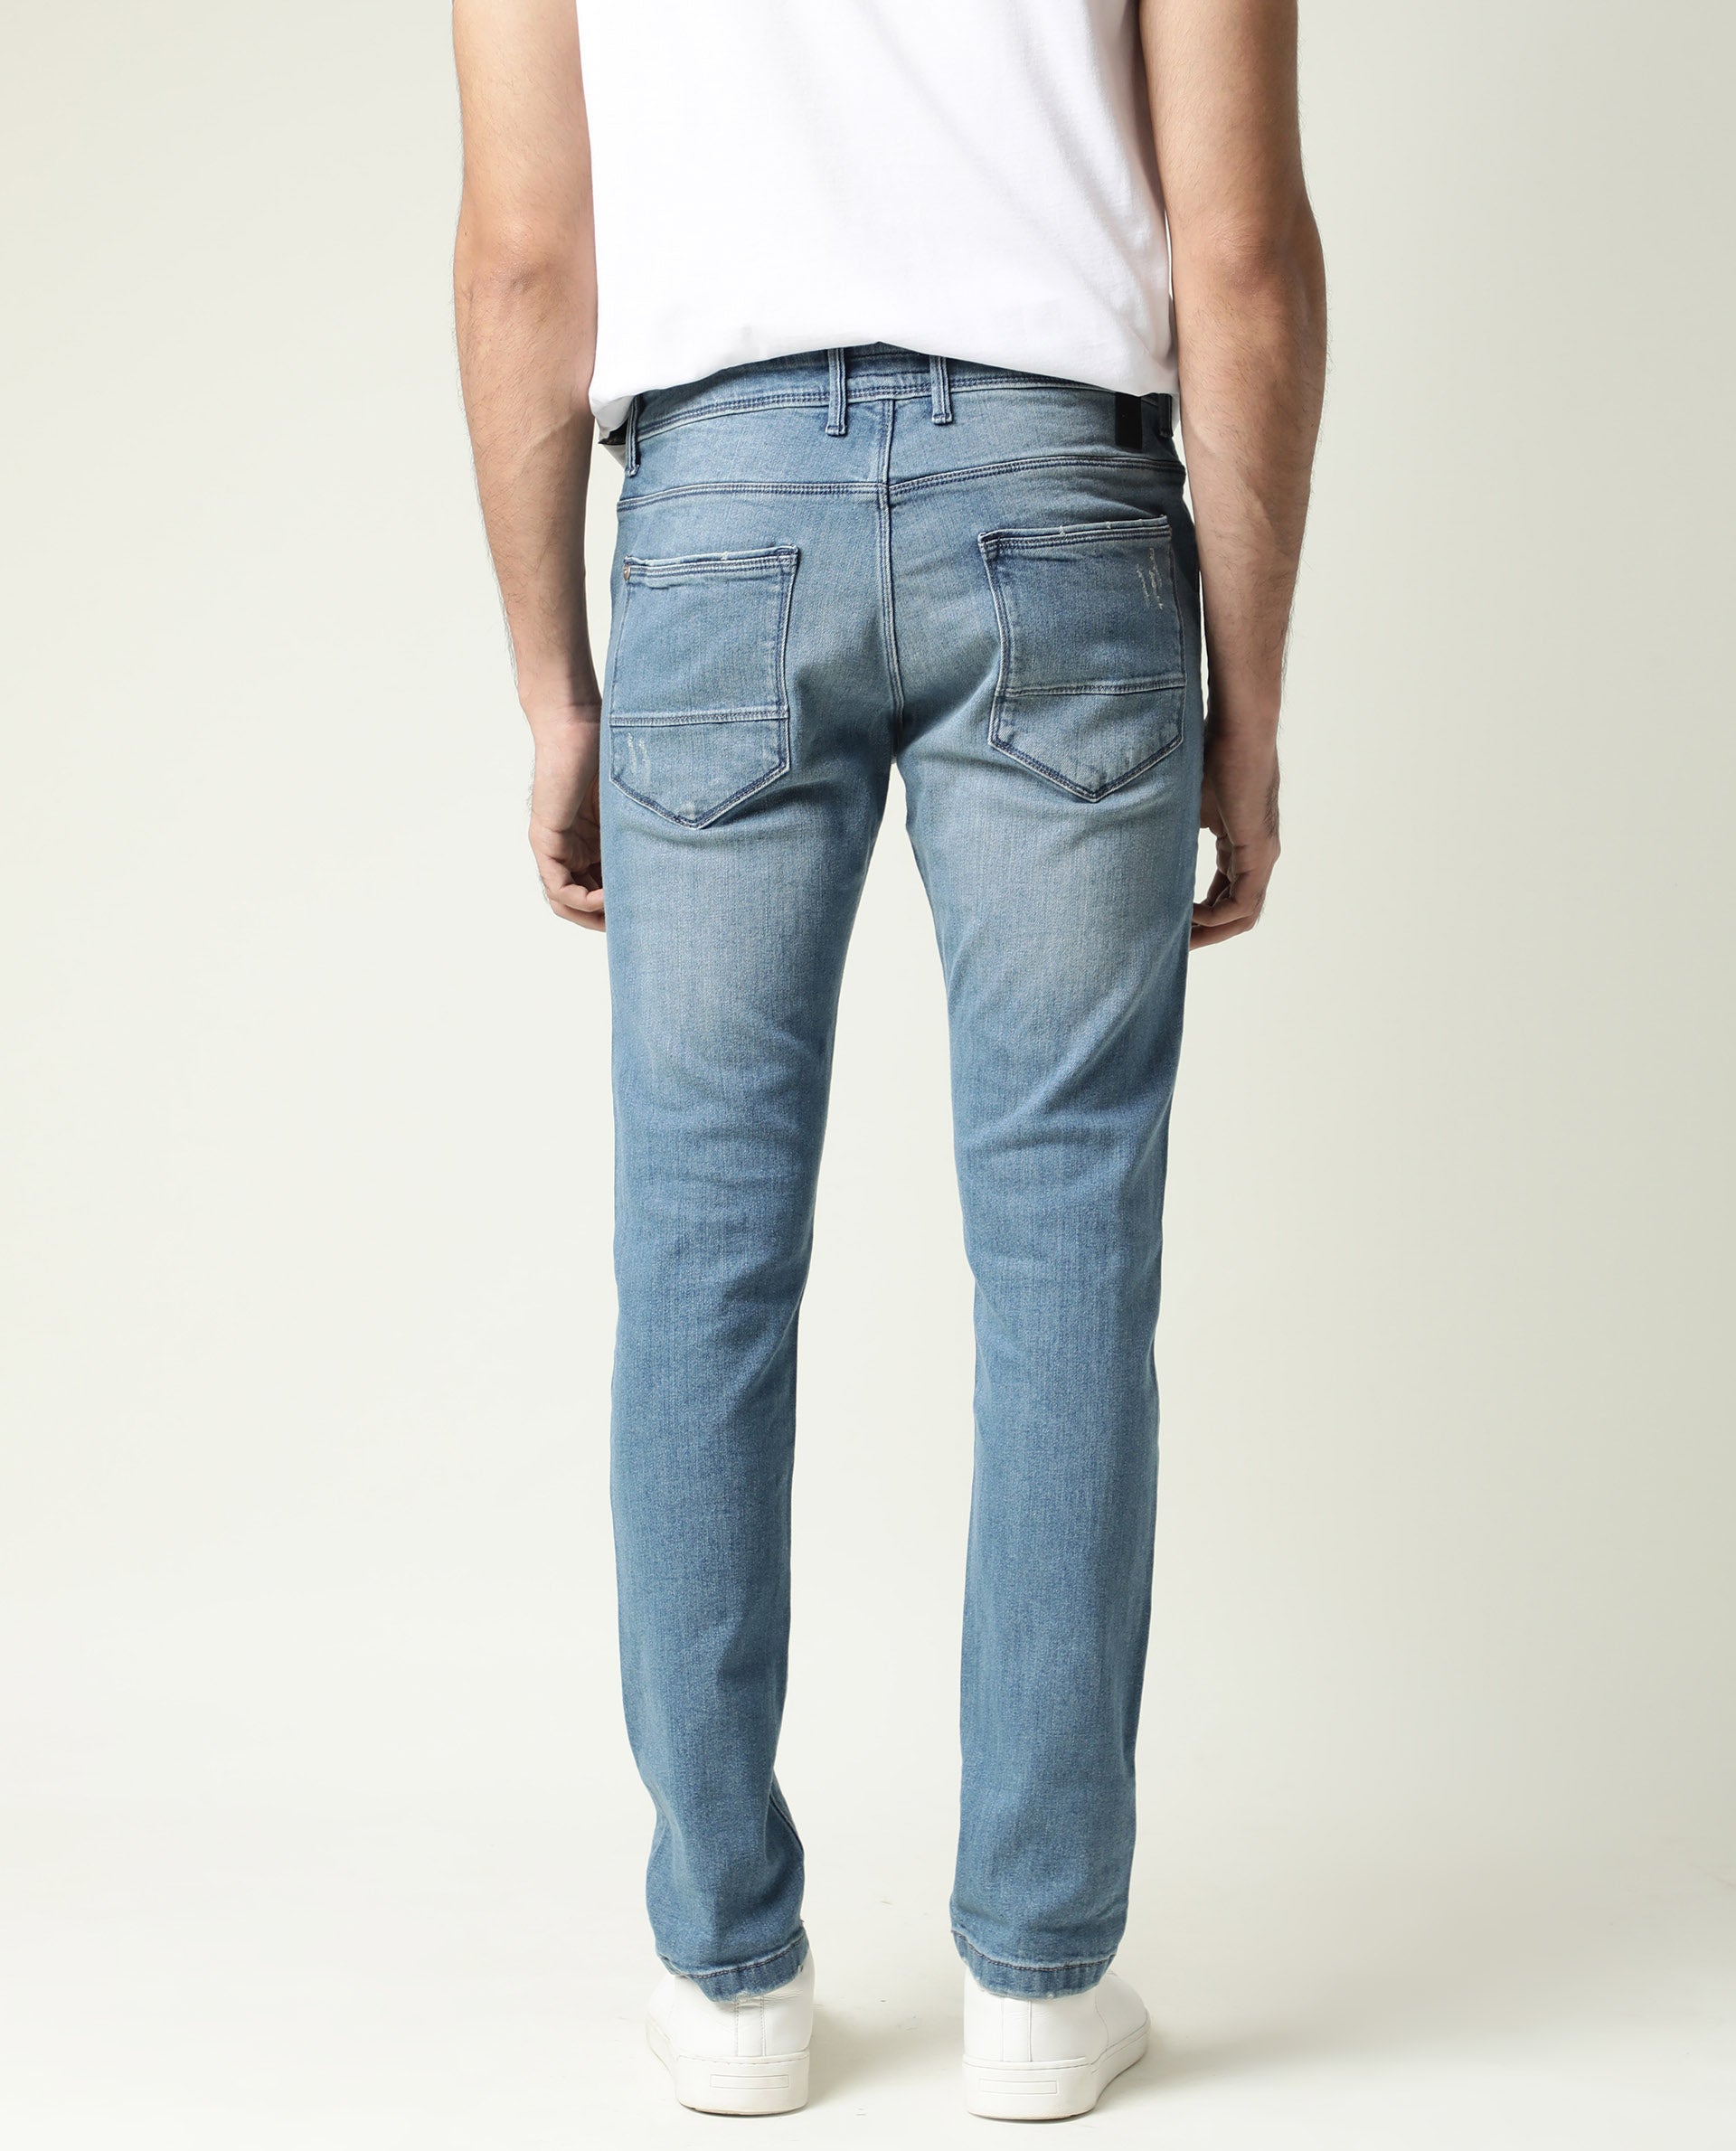 RIPPED SLIM FIT JEANS - Light blue